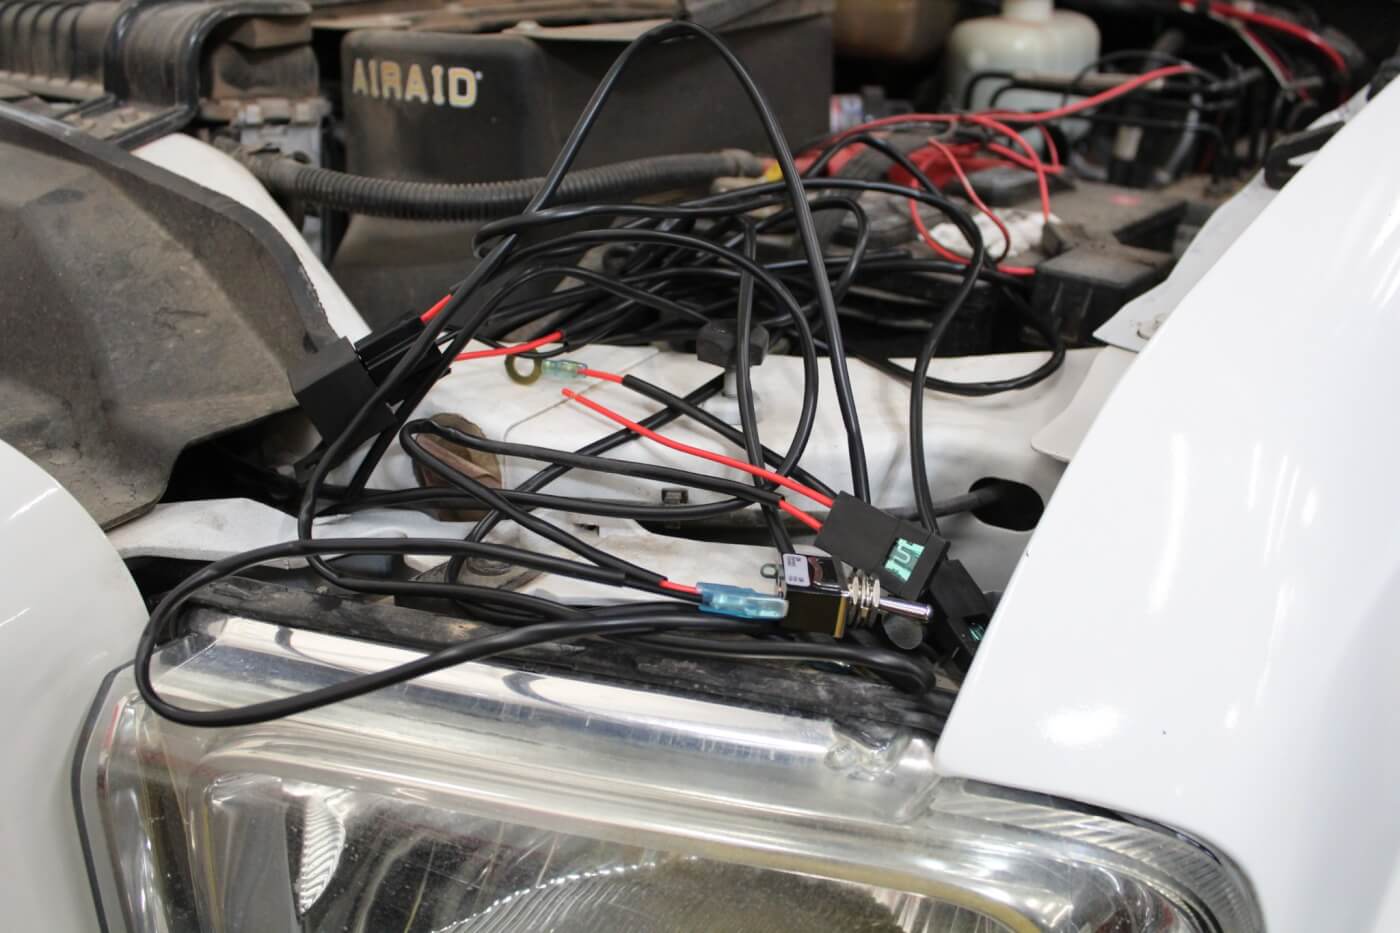 17. The Incredible RC1X grille includes a simple wiring harness to wire up the LED light bar. Though it looks a bit jumbled up here, installation was a simple matter of routing the wiring into the cab and hooking it up to a power source. Wiring installation took about 15 minutes.